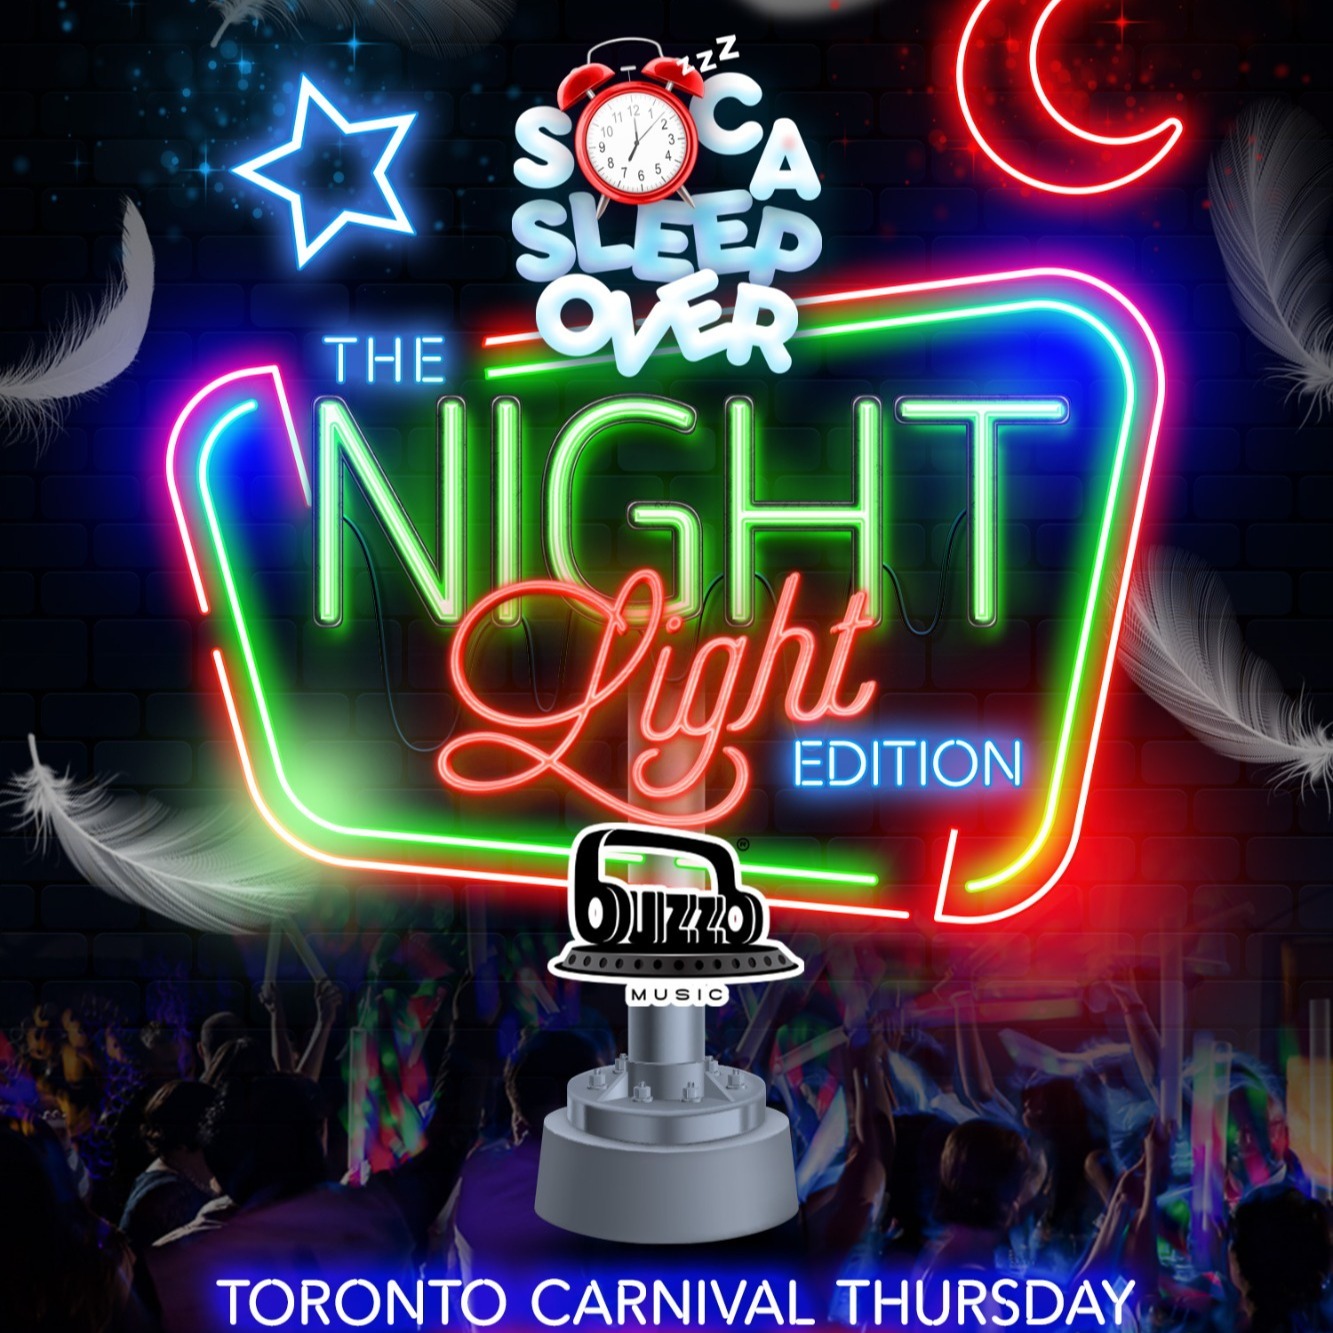 SOCA SLEEP OVER - Toronto Carnival THURS - The PJ Breakfast INCLUSIVE Fete - Going to 5am!